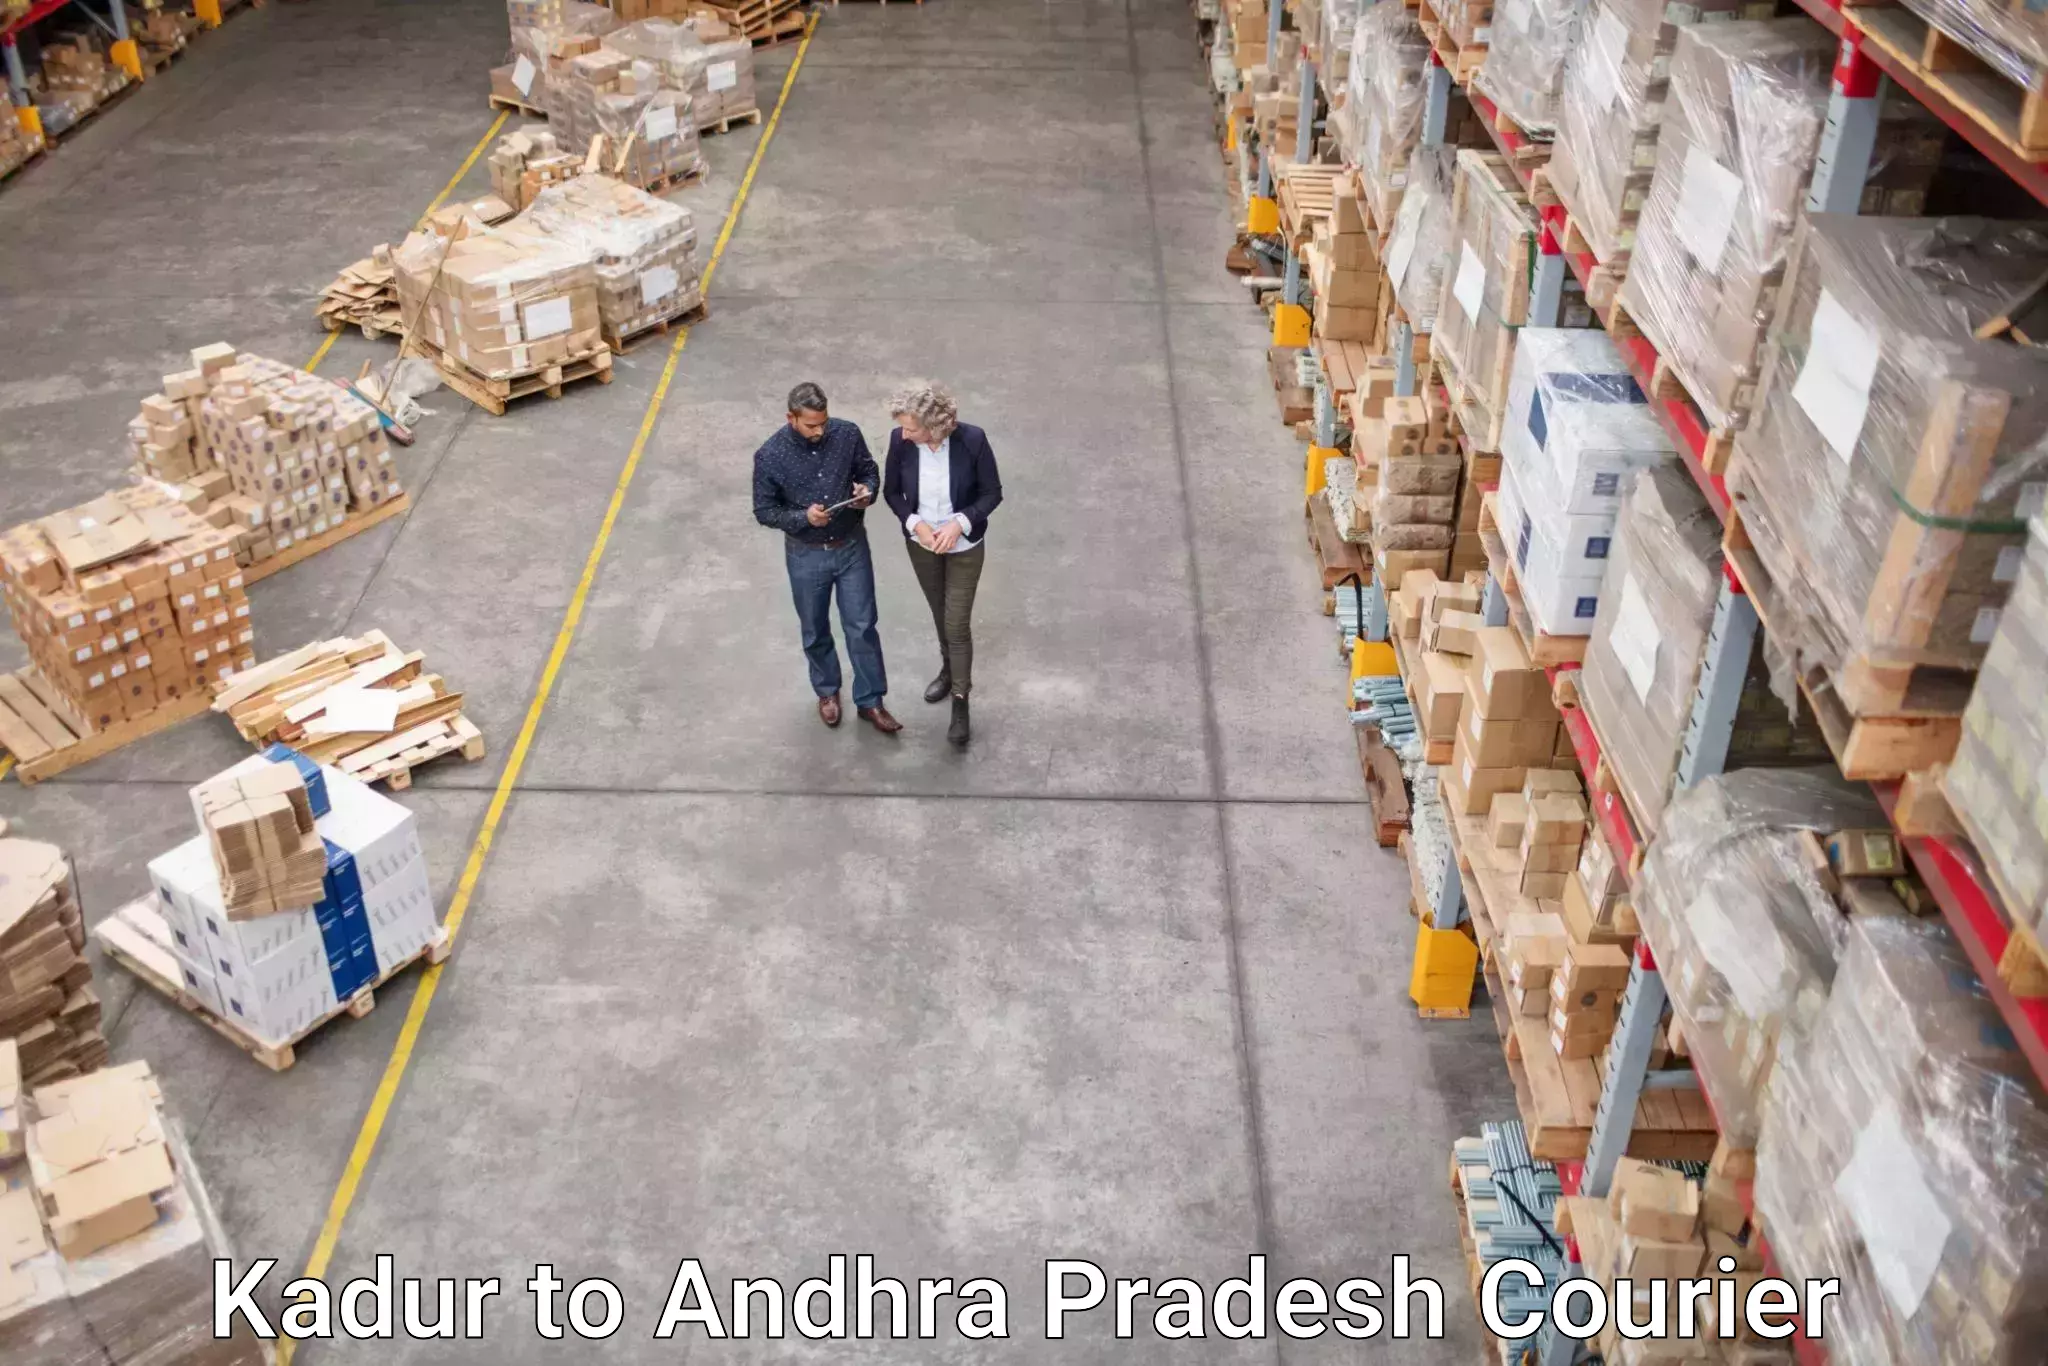 Small business couriers Kadur to Visakhapatnam Port